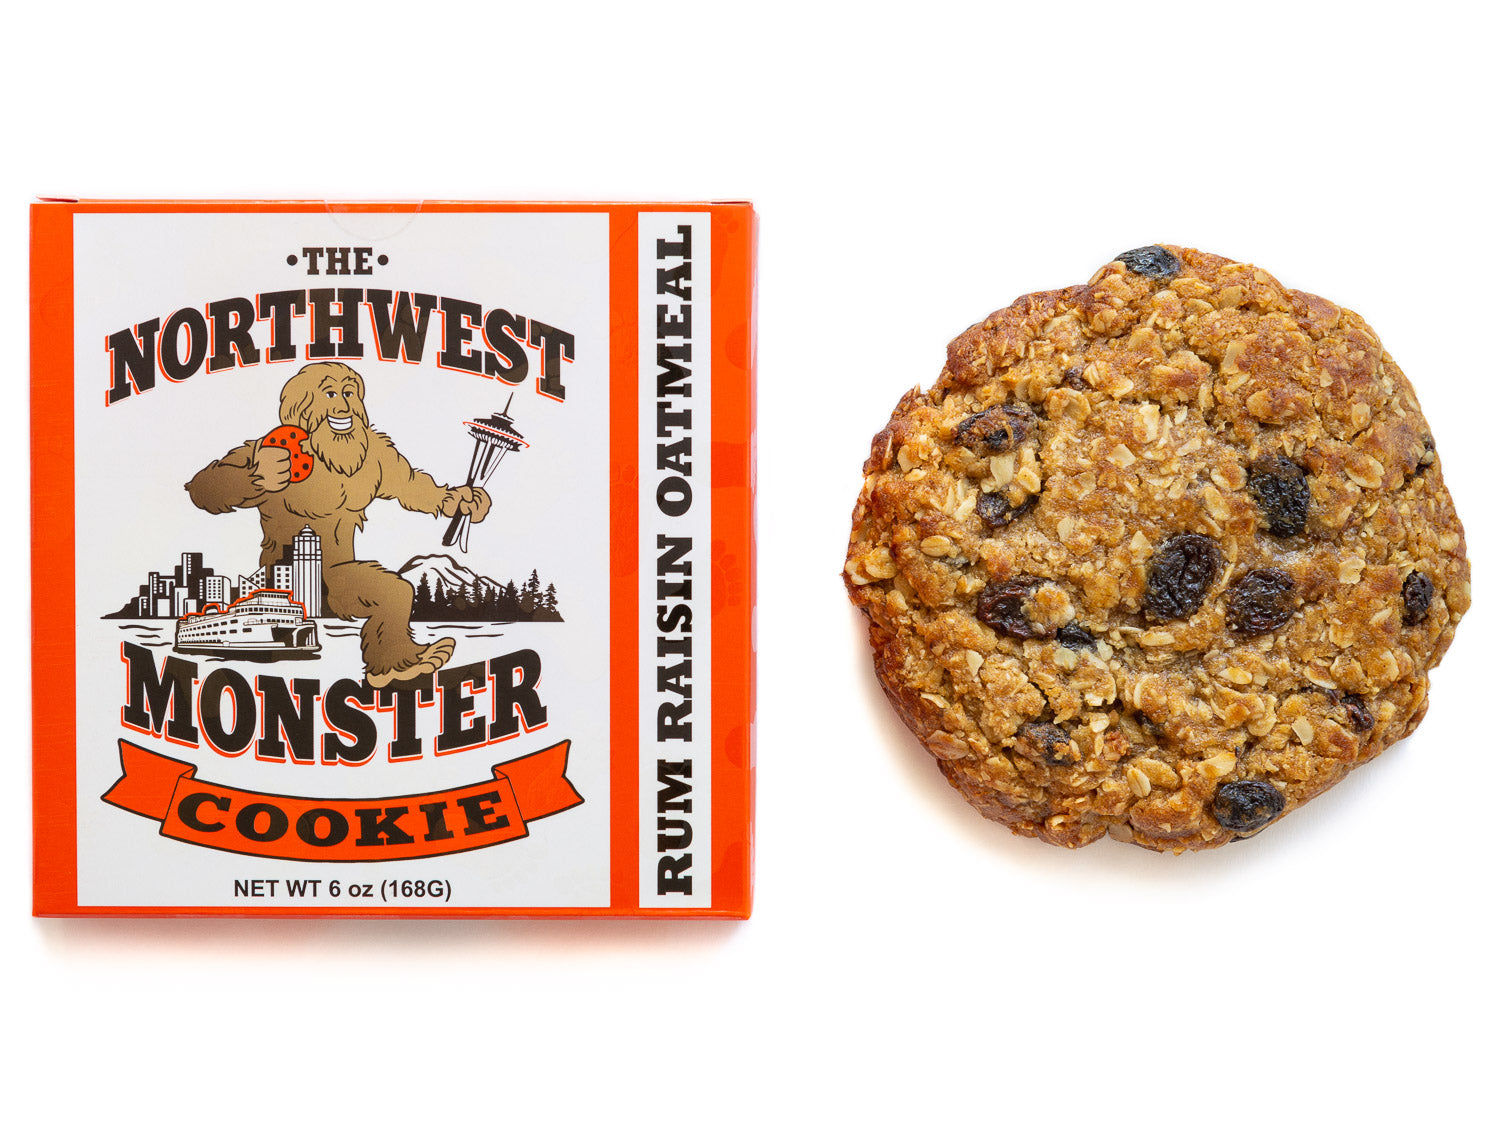  the northwest rum raisin monster cookie sitting beside the box it came in